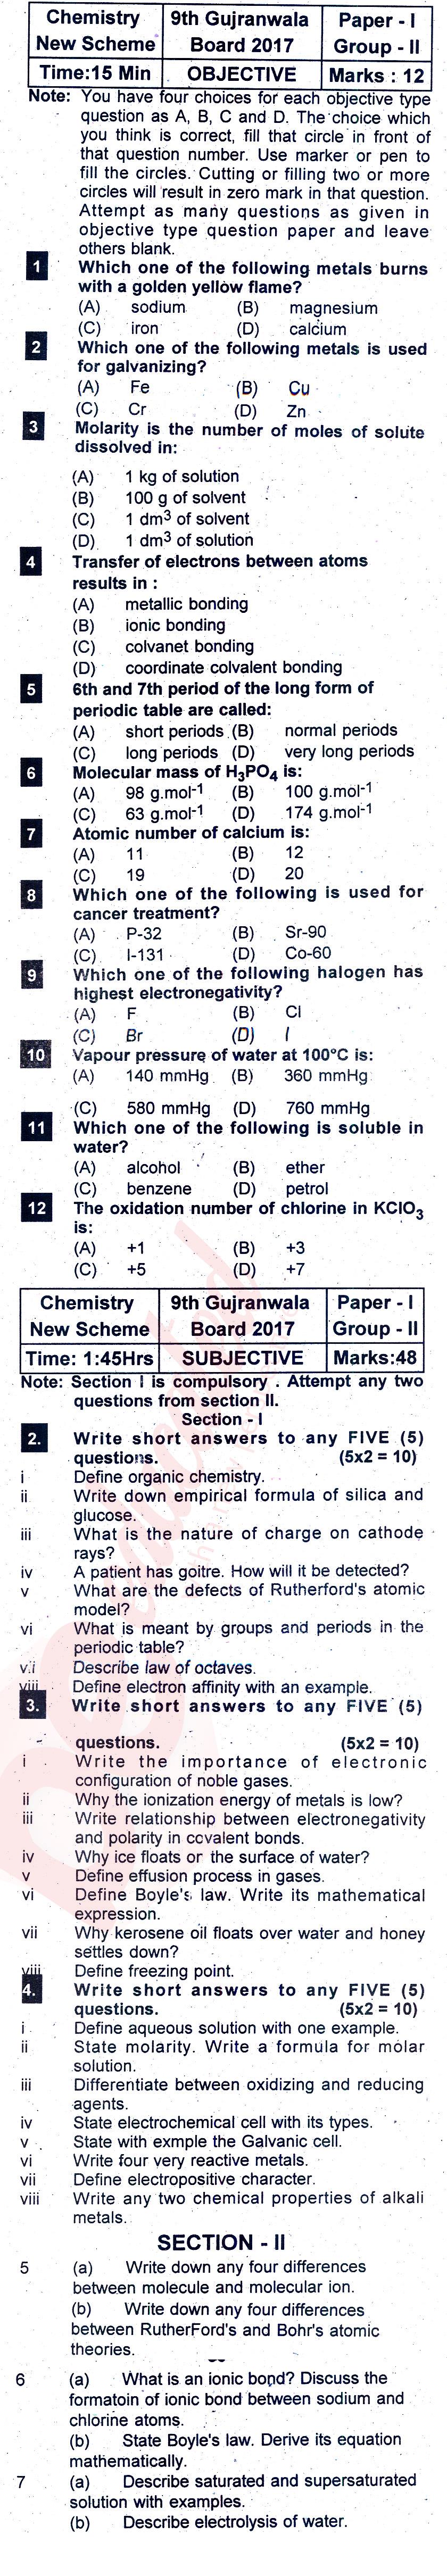 Chemistry 9th English Medium Past Paper Group 2 BISE Gujranwala 2017